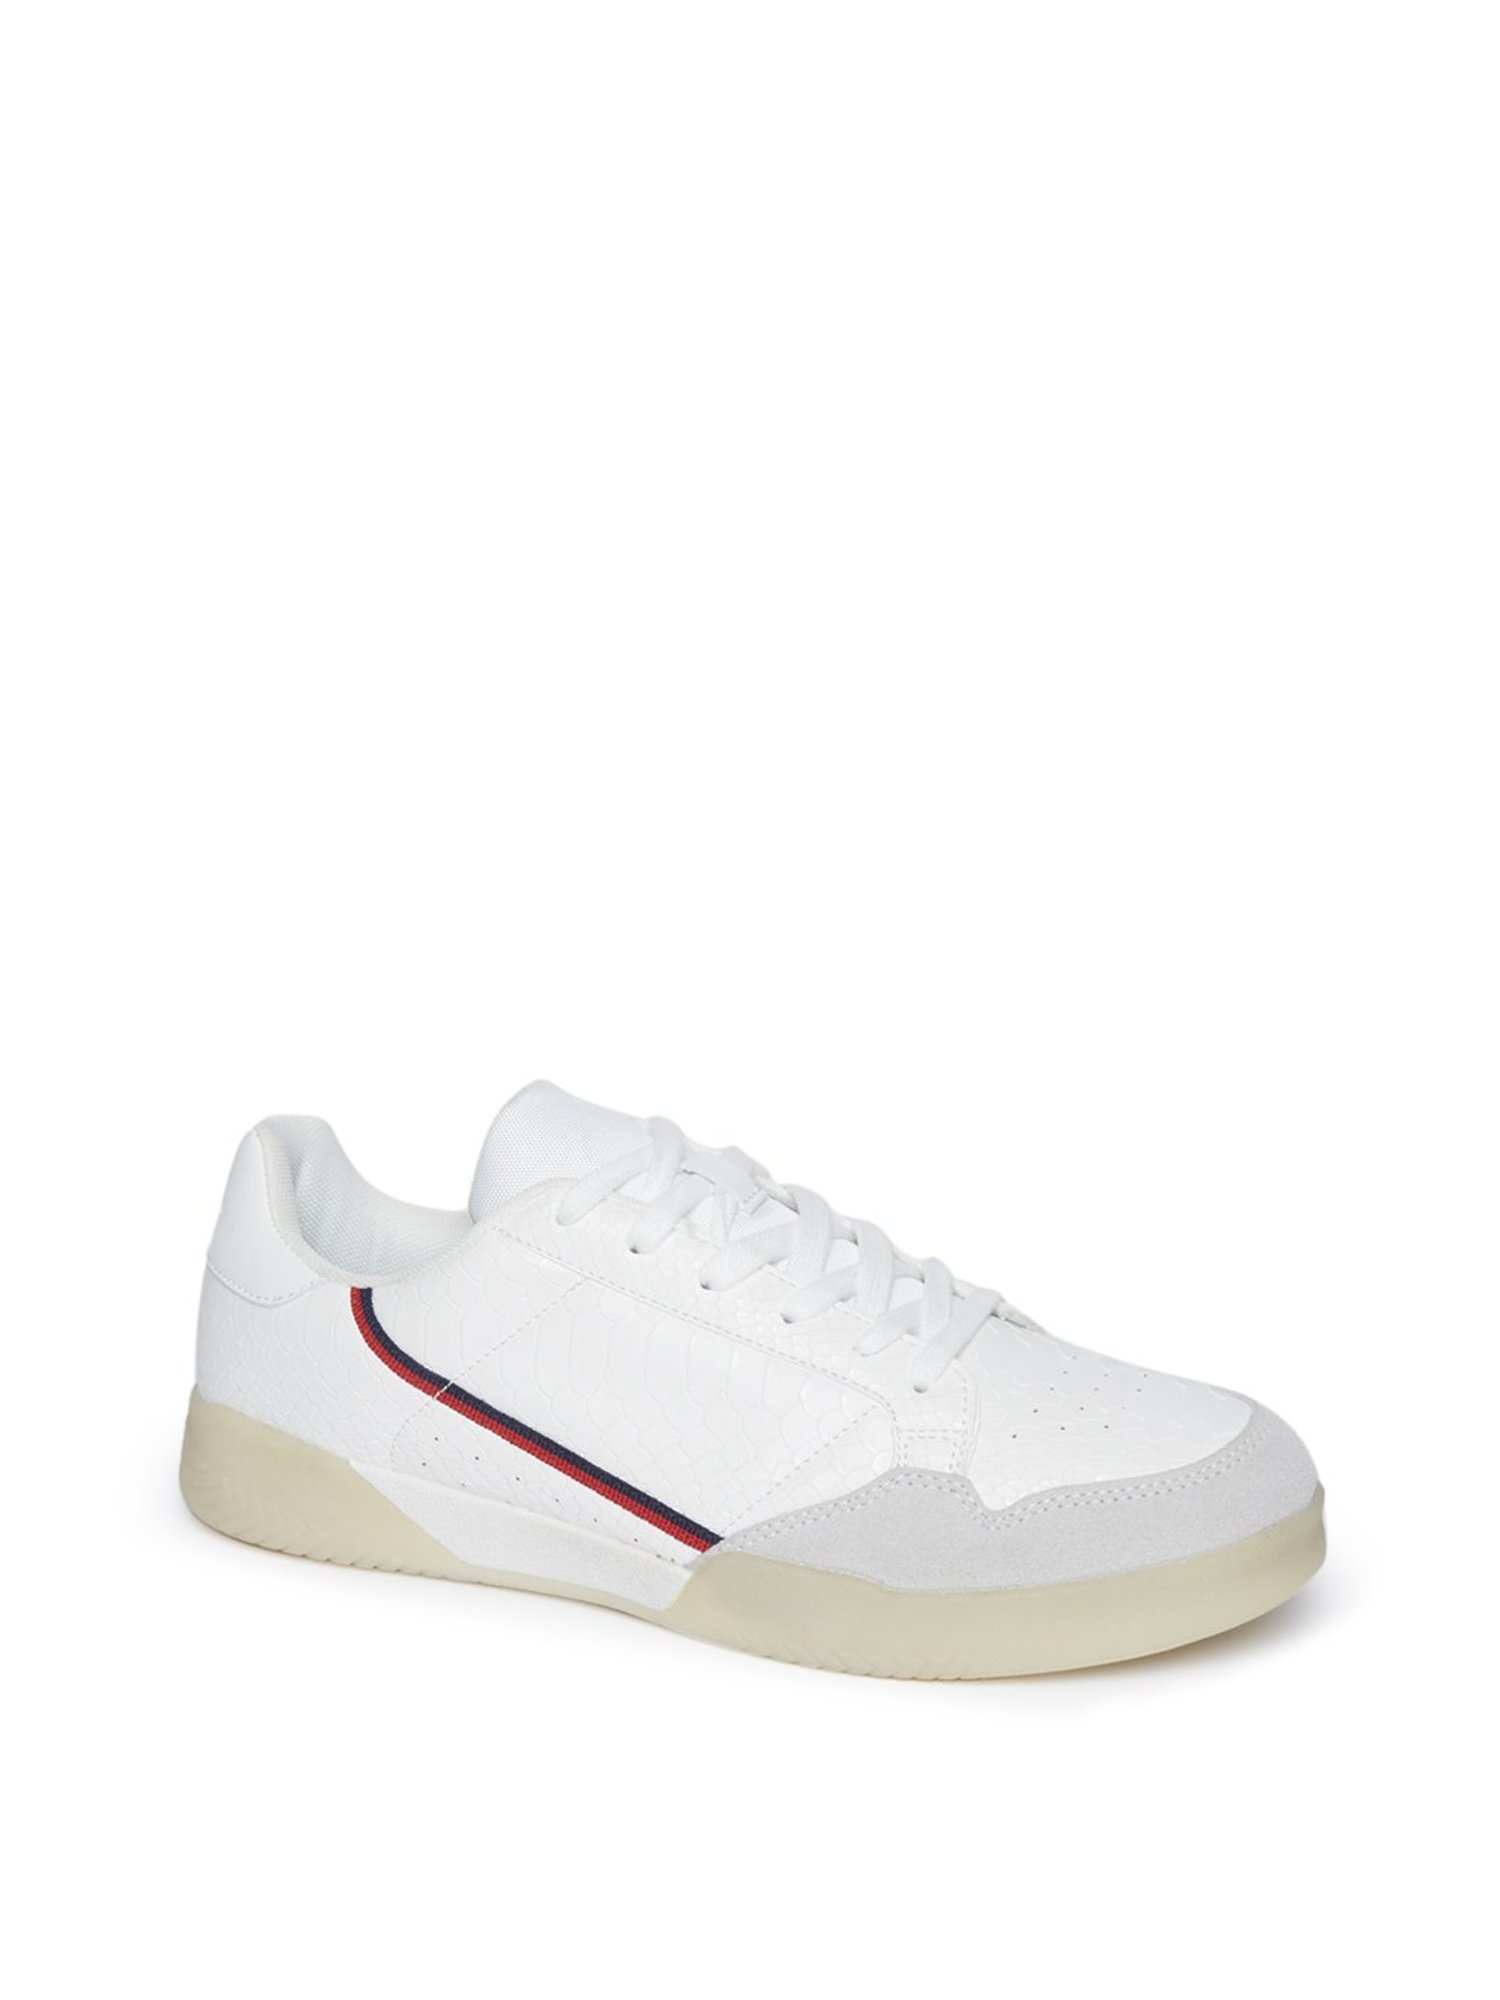 Westside White Faux-Leather Sneakers 